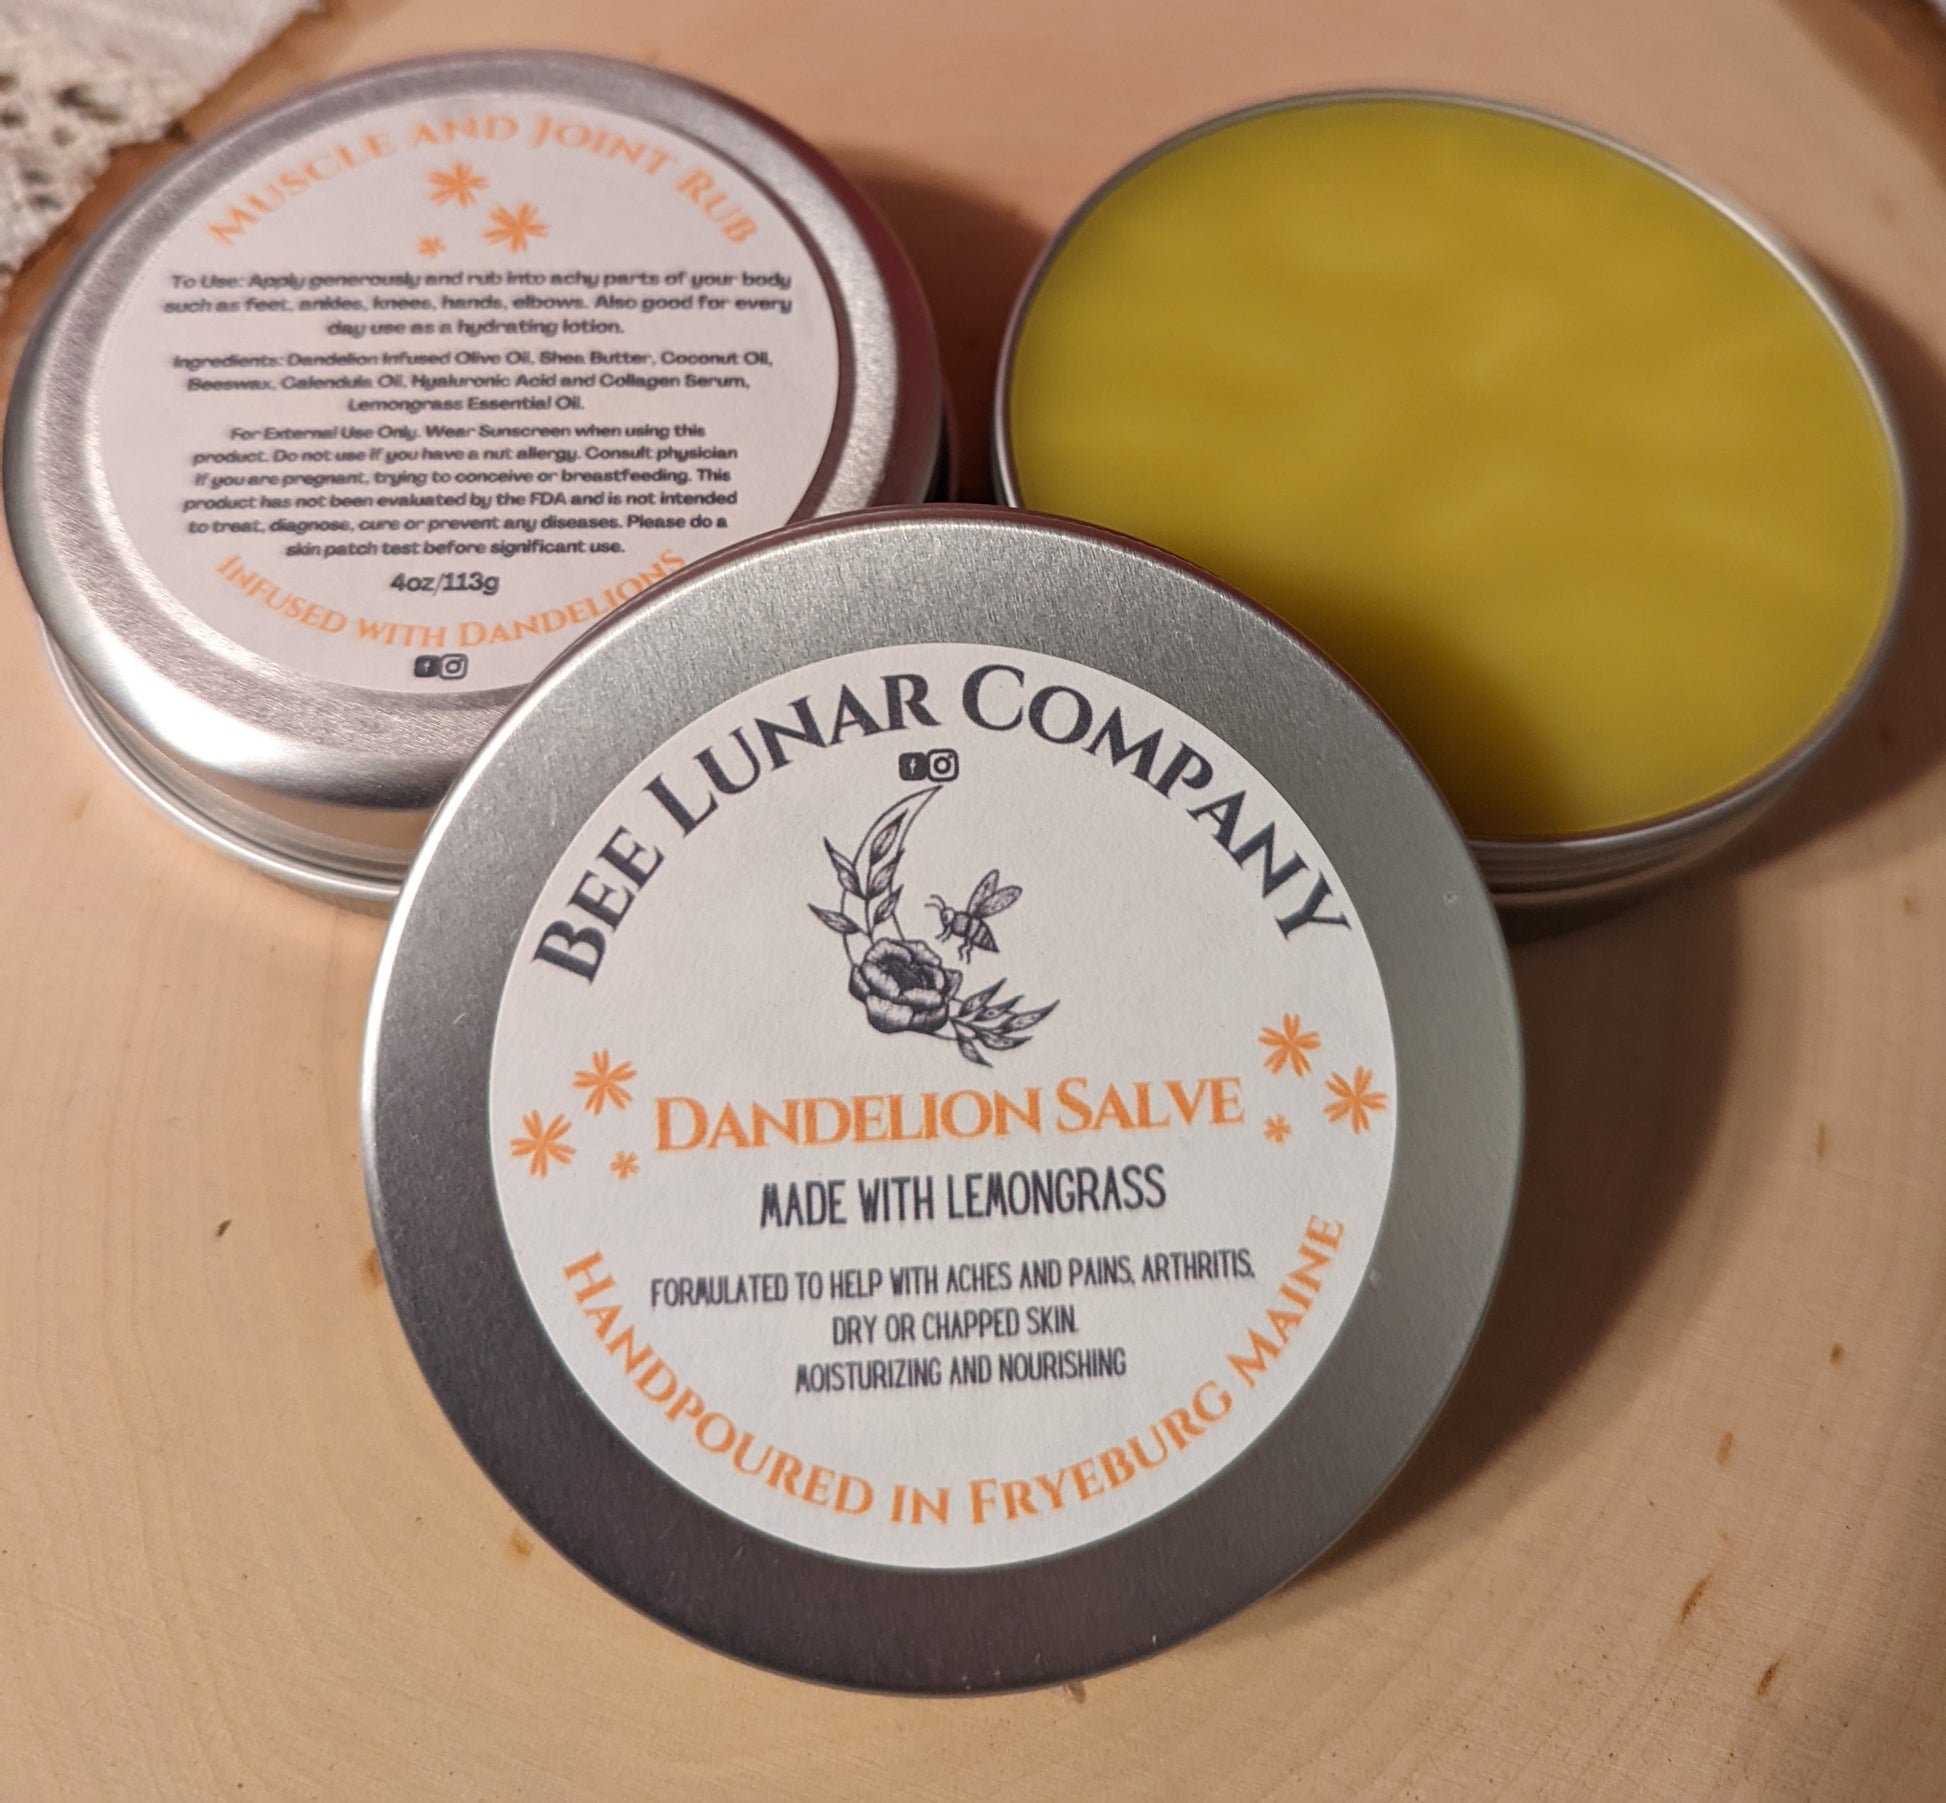 Dandelion Salve is packed full of beneficial properties, but this can be used for muscle and joint pain, along with achy muscles, tension headaches or just a part of your daily skincare routine.